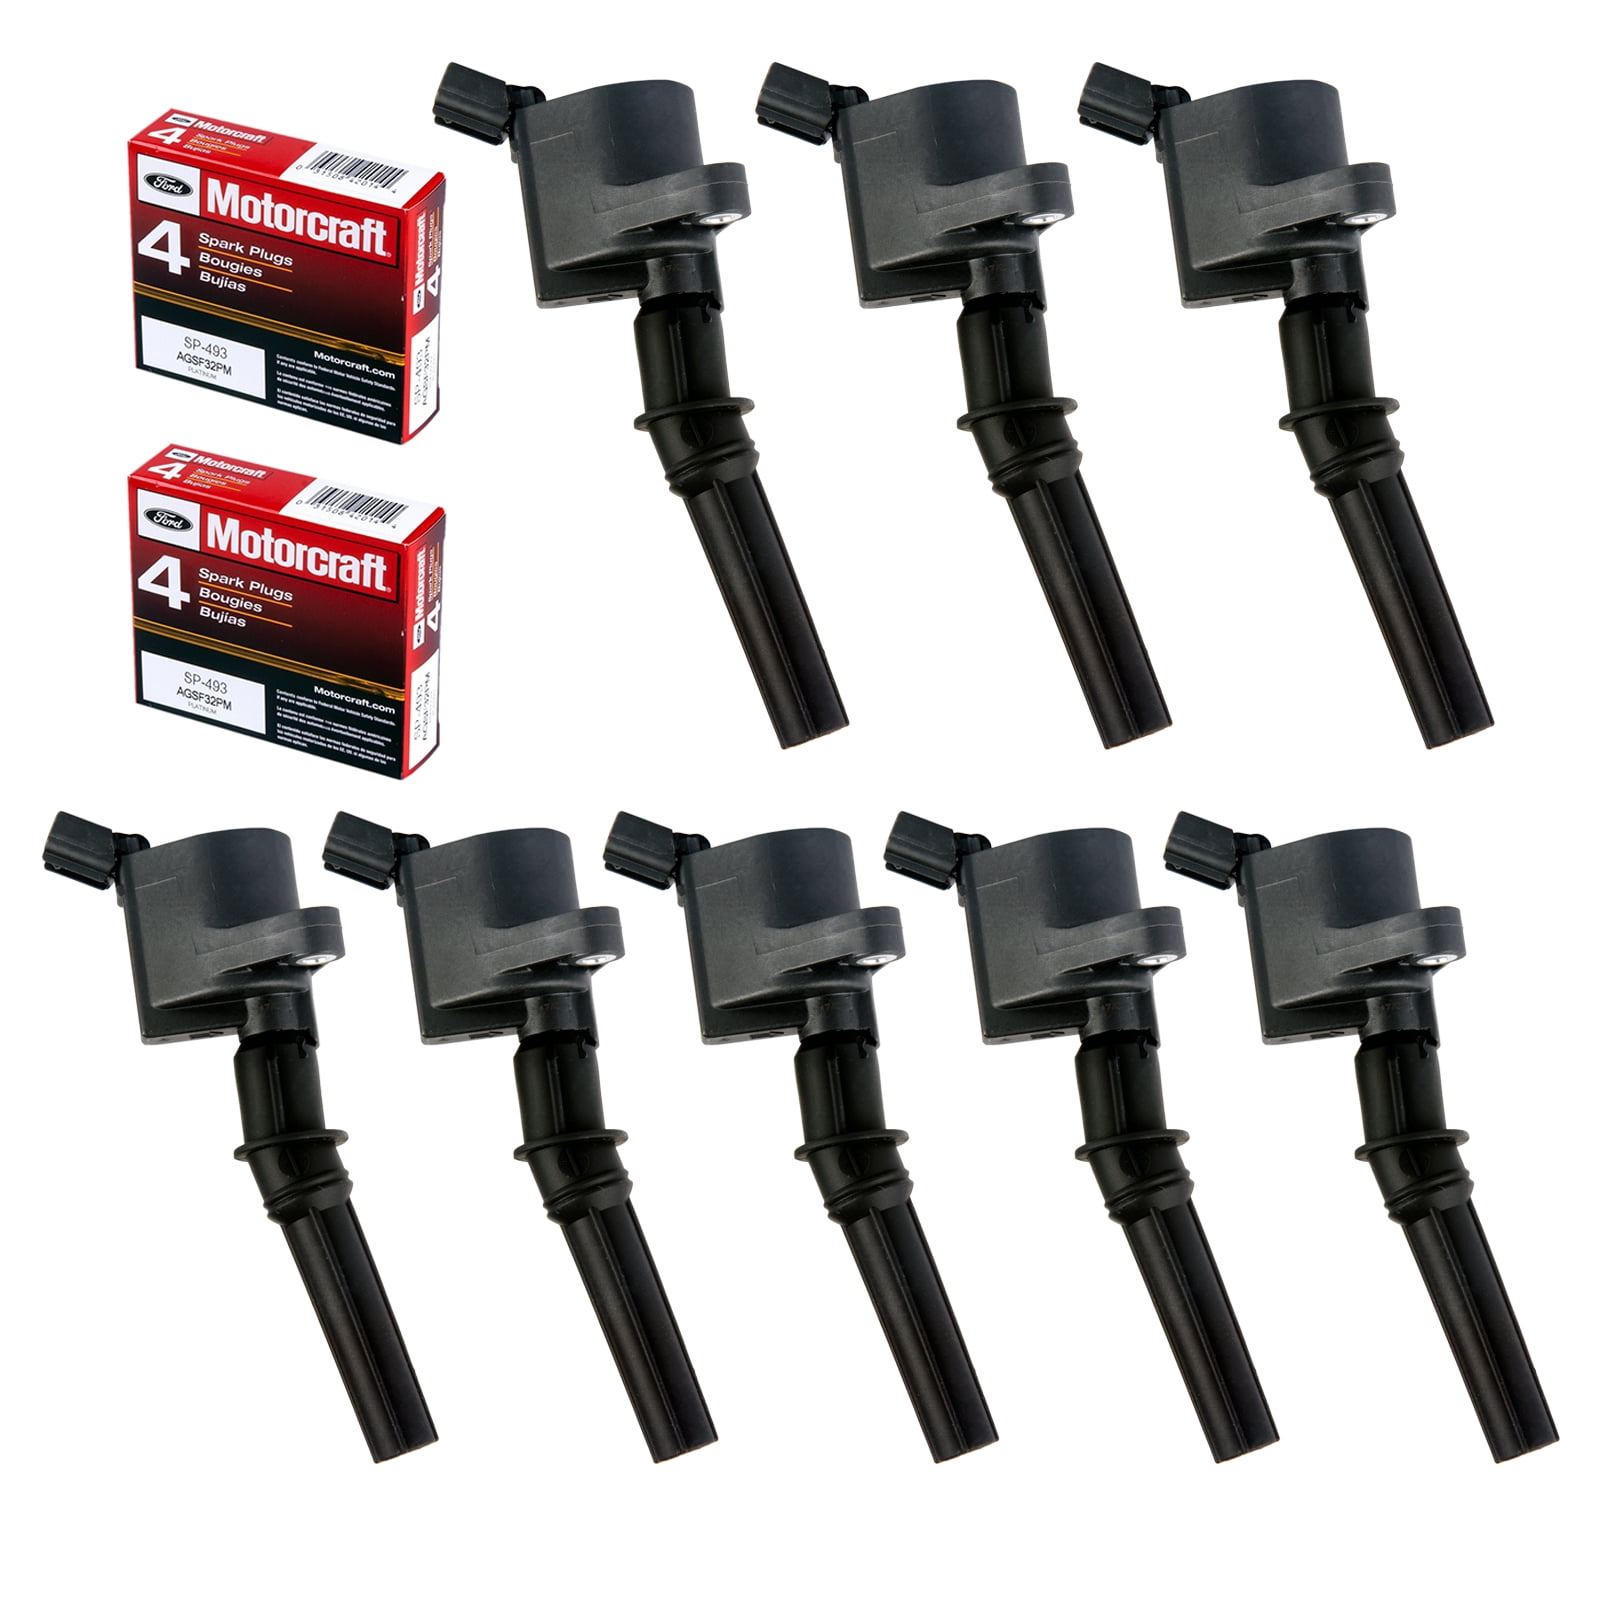 MAS Ignition Coils DG508 and Motorcraft Spark Plugs SP493 for Ford Lincoln Mercury 4.6L engines